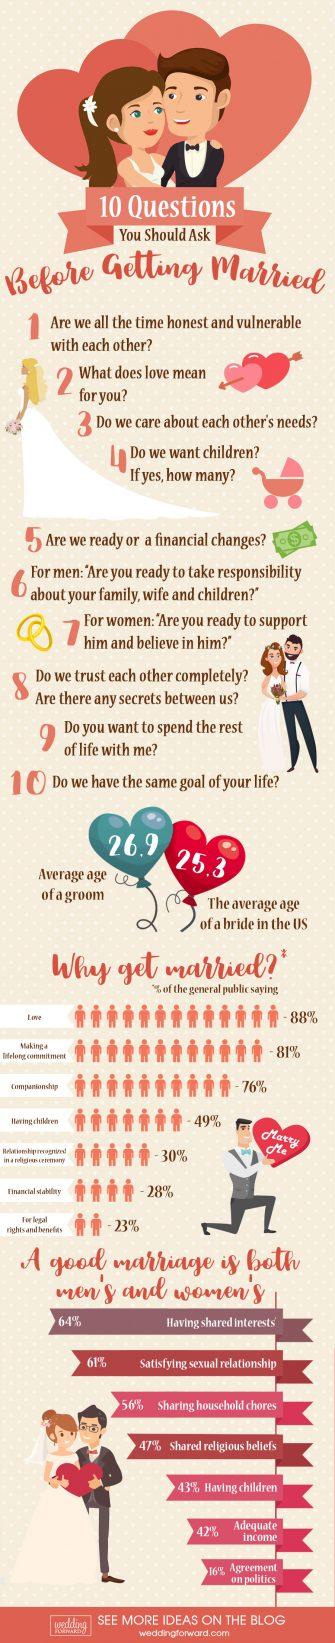 when to get married 10 questions you should ask before getting married